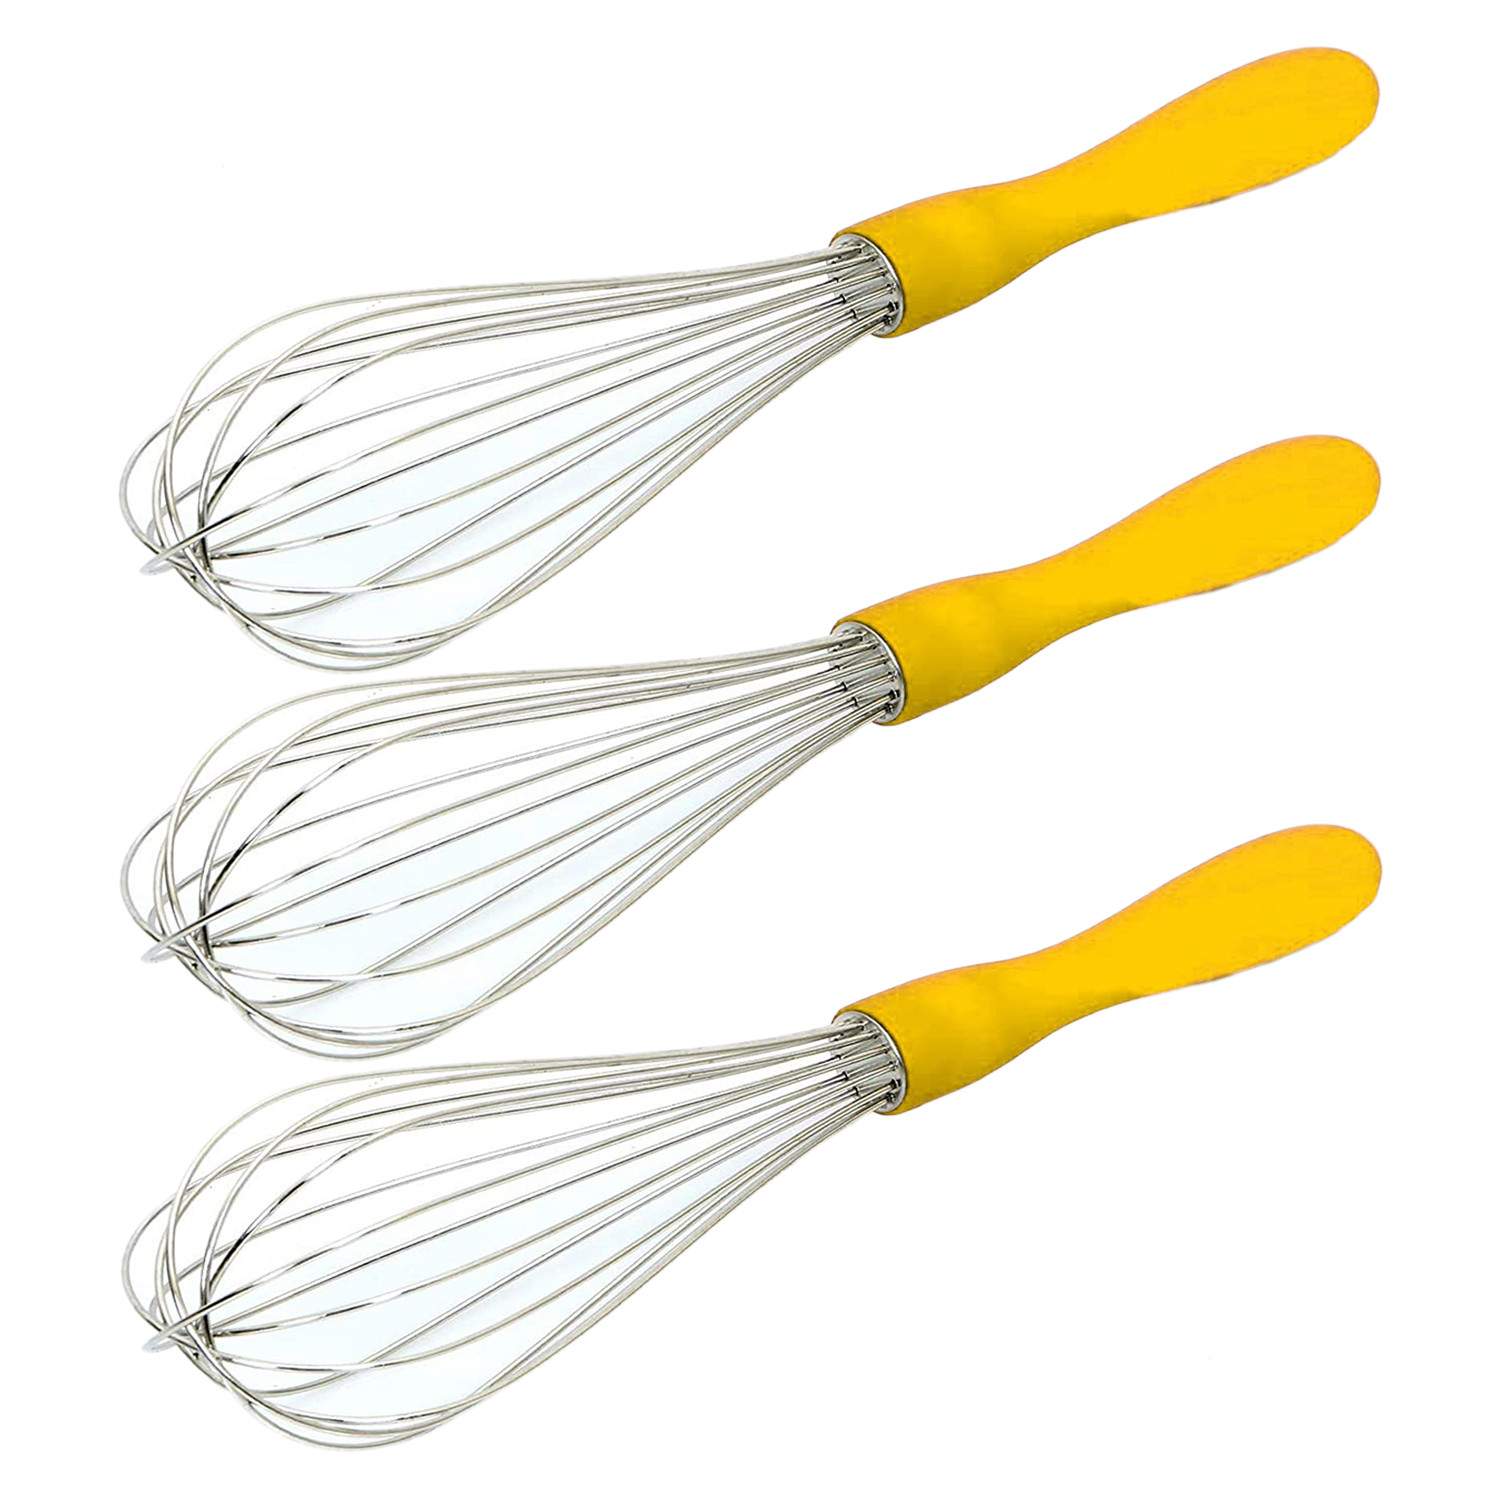 Kuber Industries Hand Blender|Handheld Stainless-Steel Wire Whisk Perfect for Blending, Whisking, Beating, Stirring (Yellow)